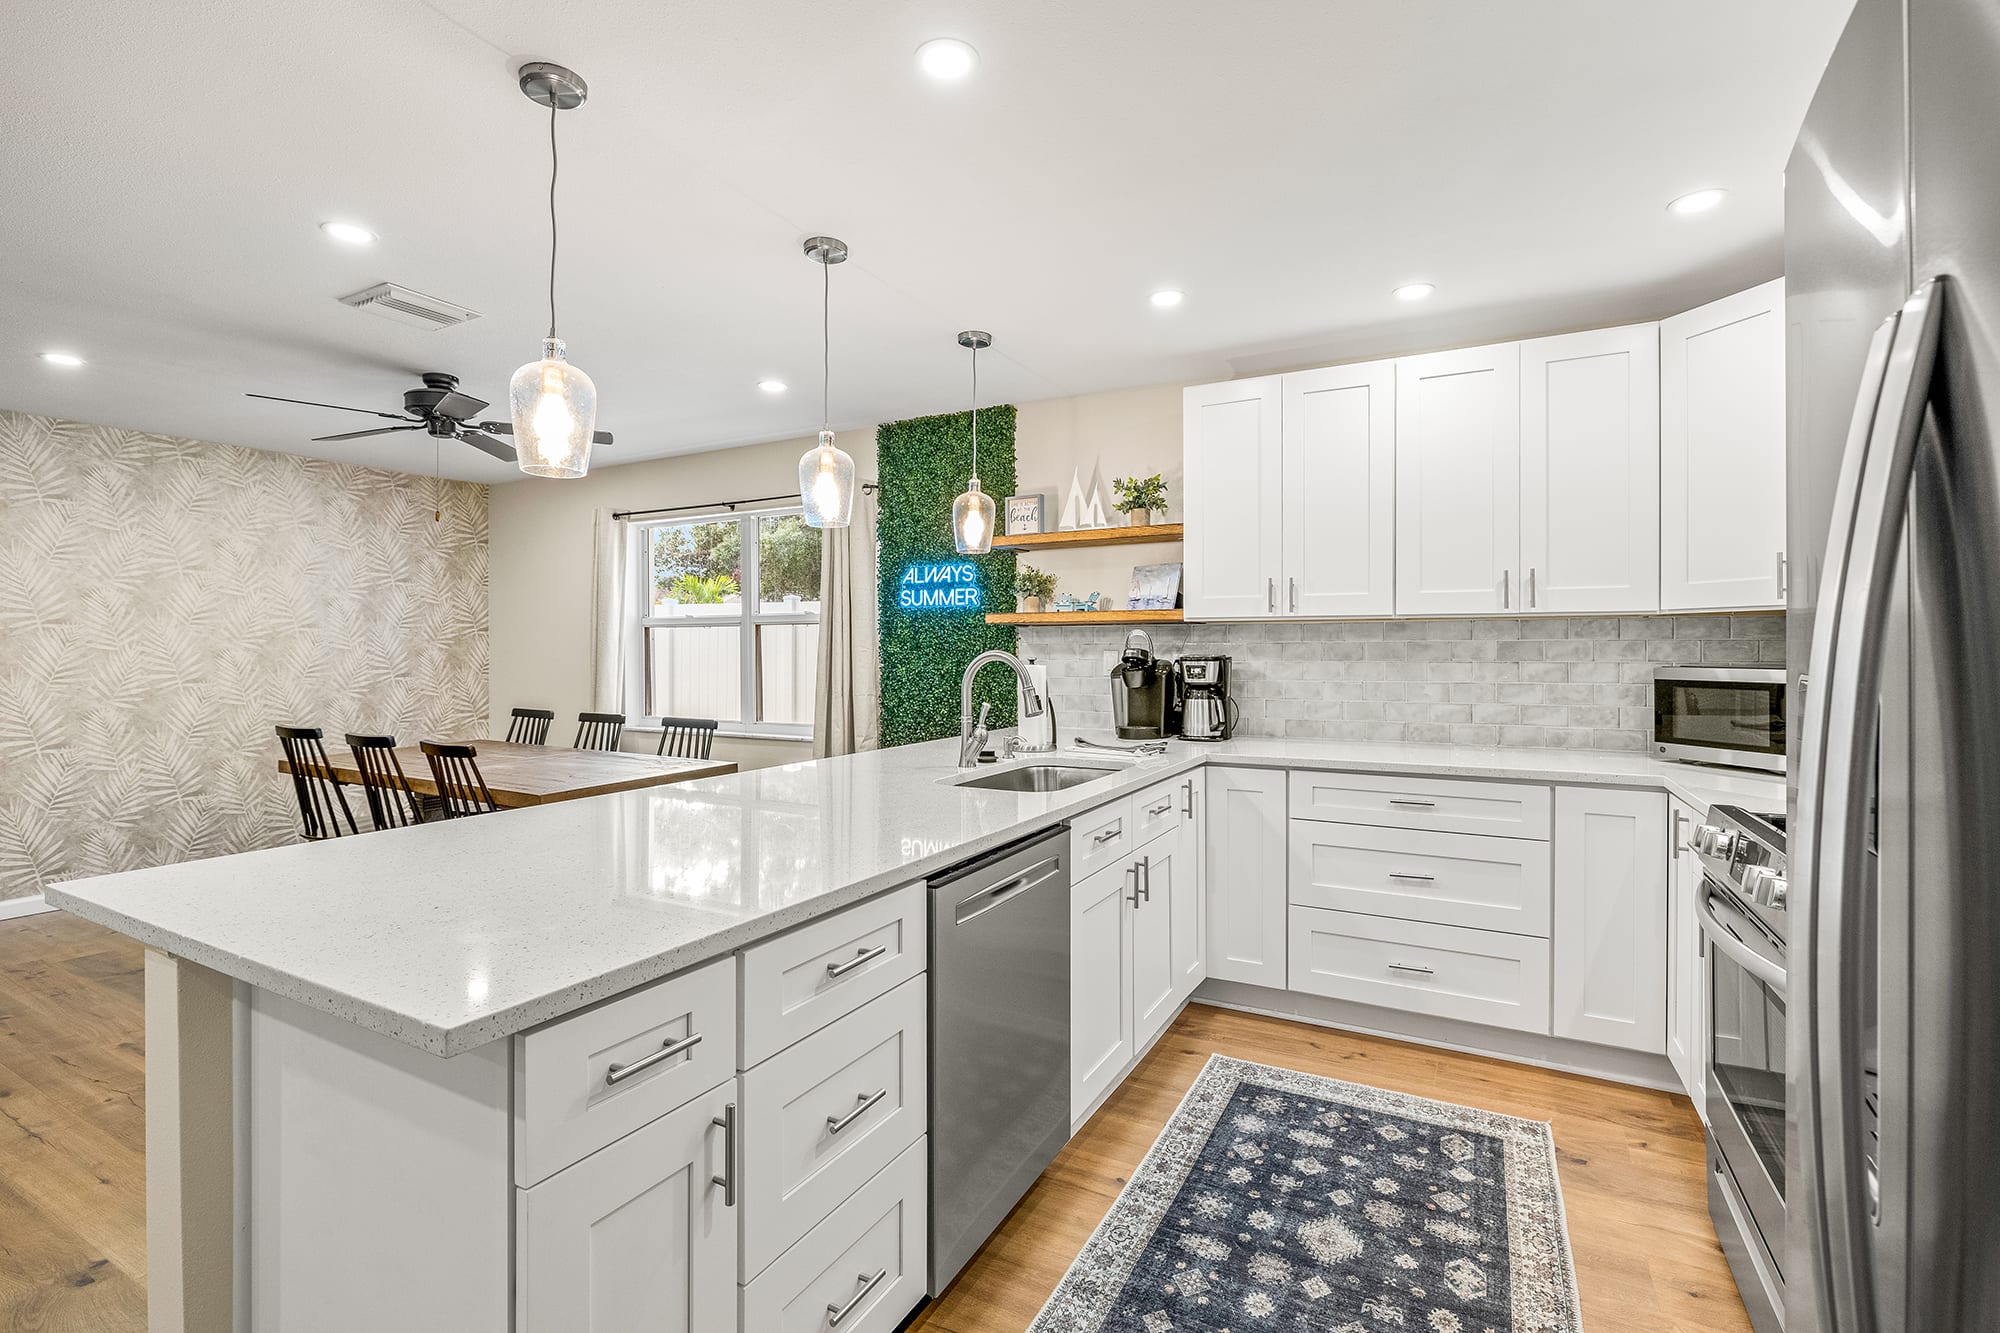 Need to whip up a meal? No problem! The kitchen features stainless steel appliances, a keurig and drip coffee maker, blender, cookware, & more!